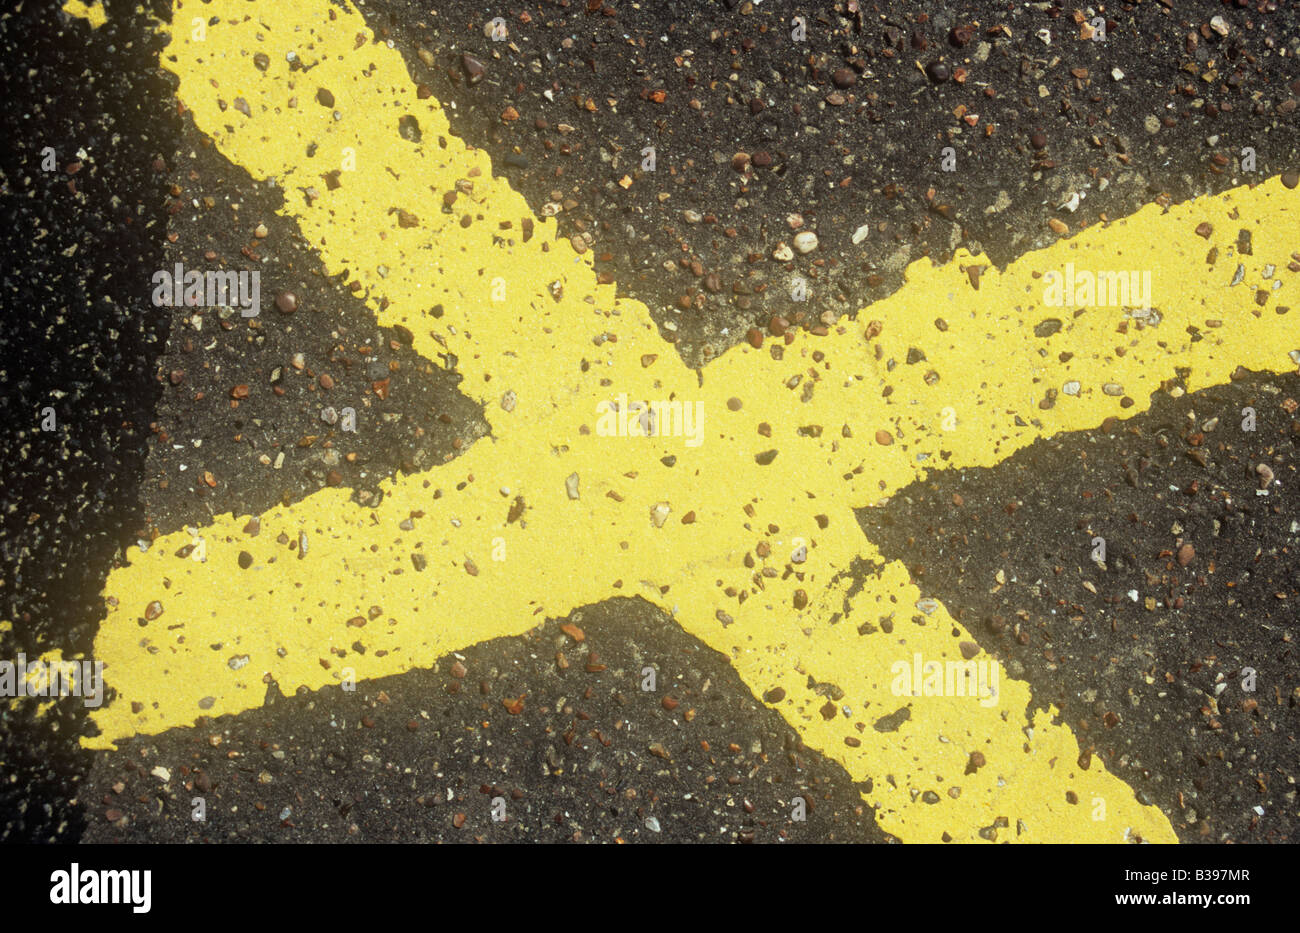 Uneven yellow lines painted on tarmac surface as part of a No Parking grid detailed as X with earlier paint covered Stock Photo